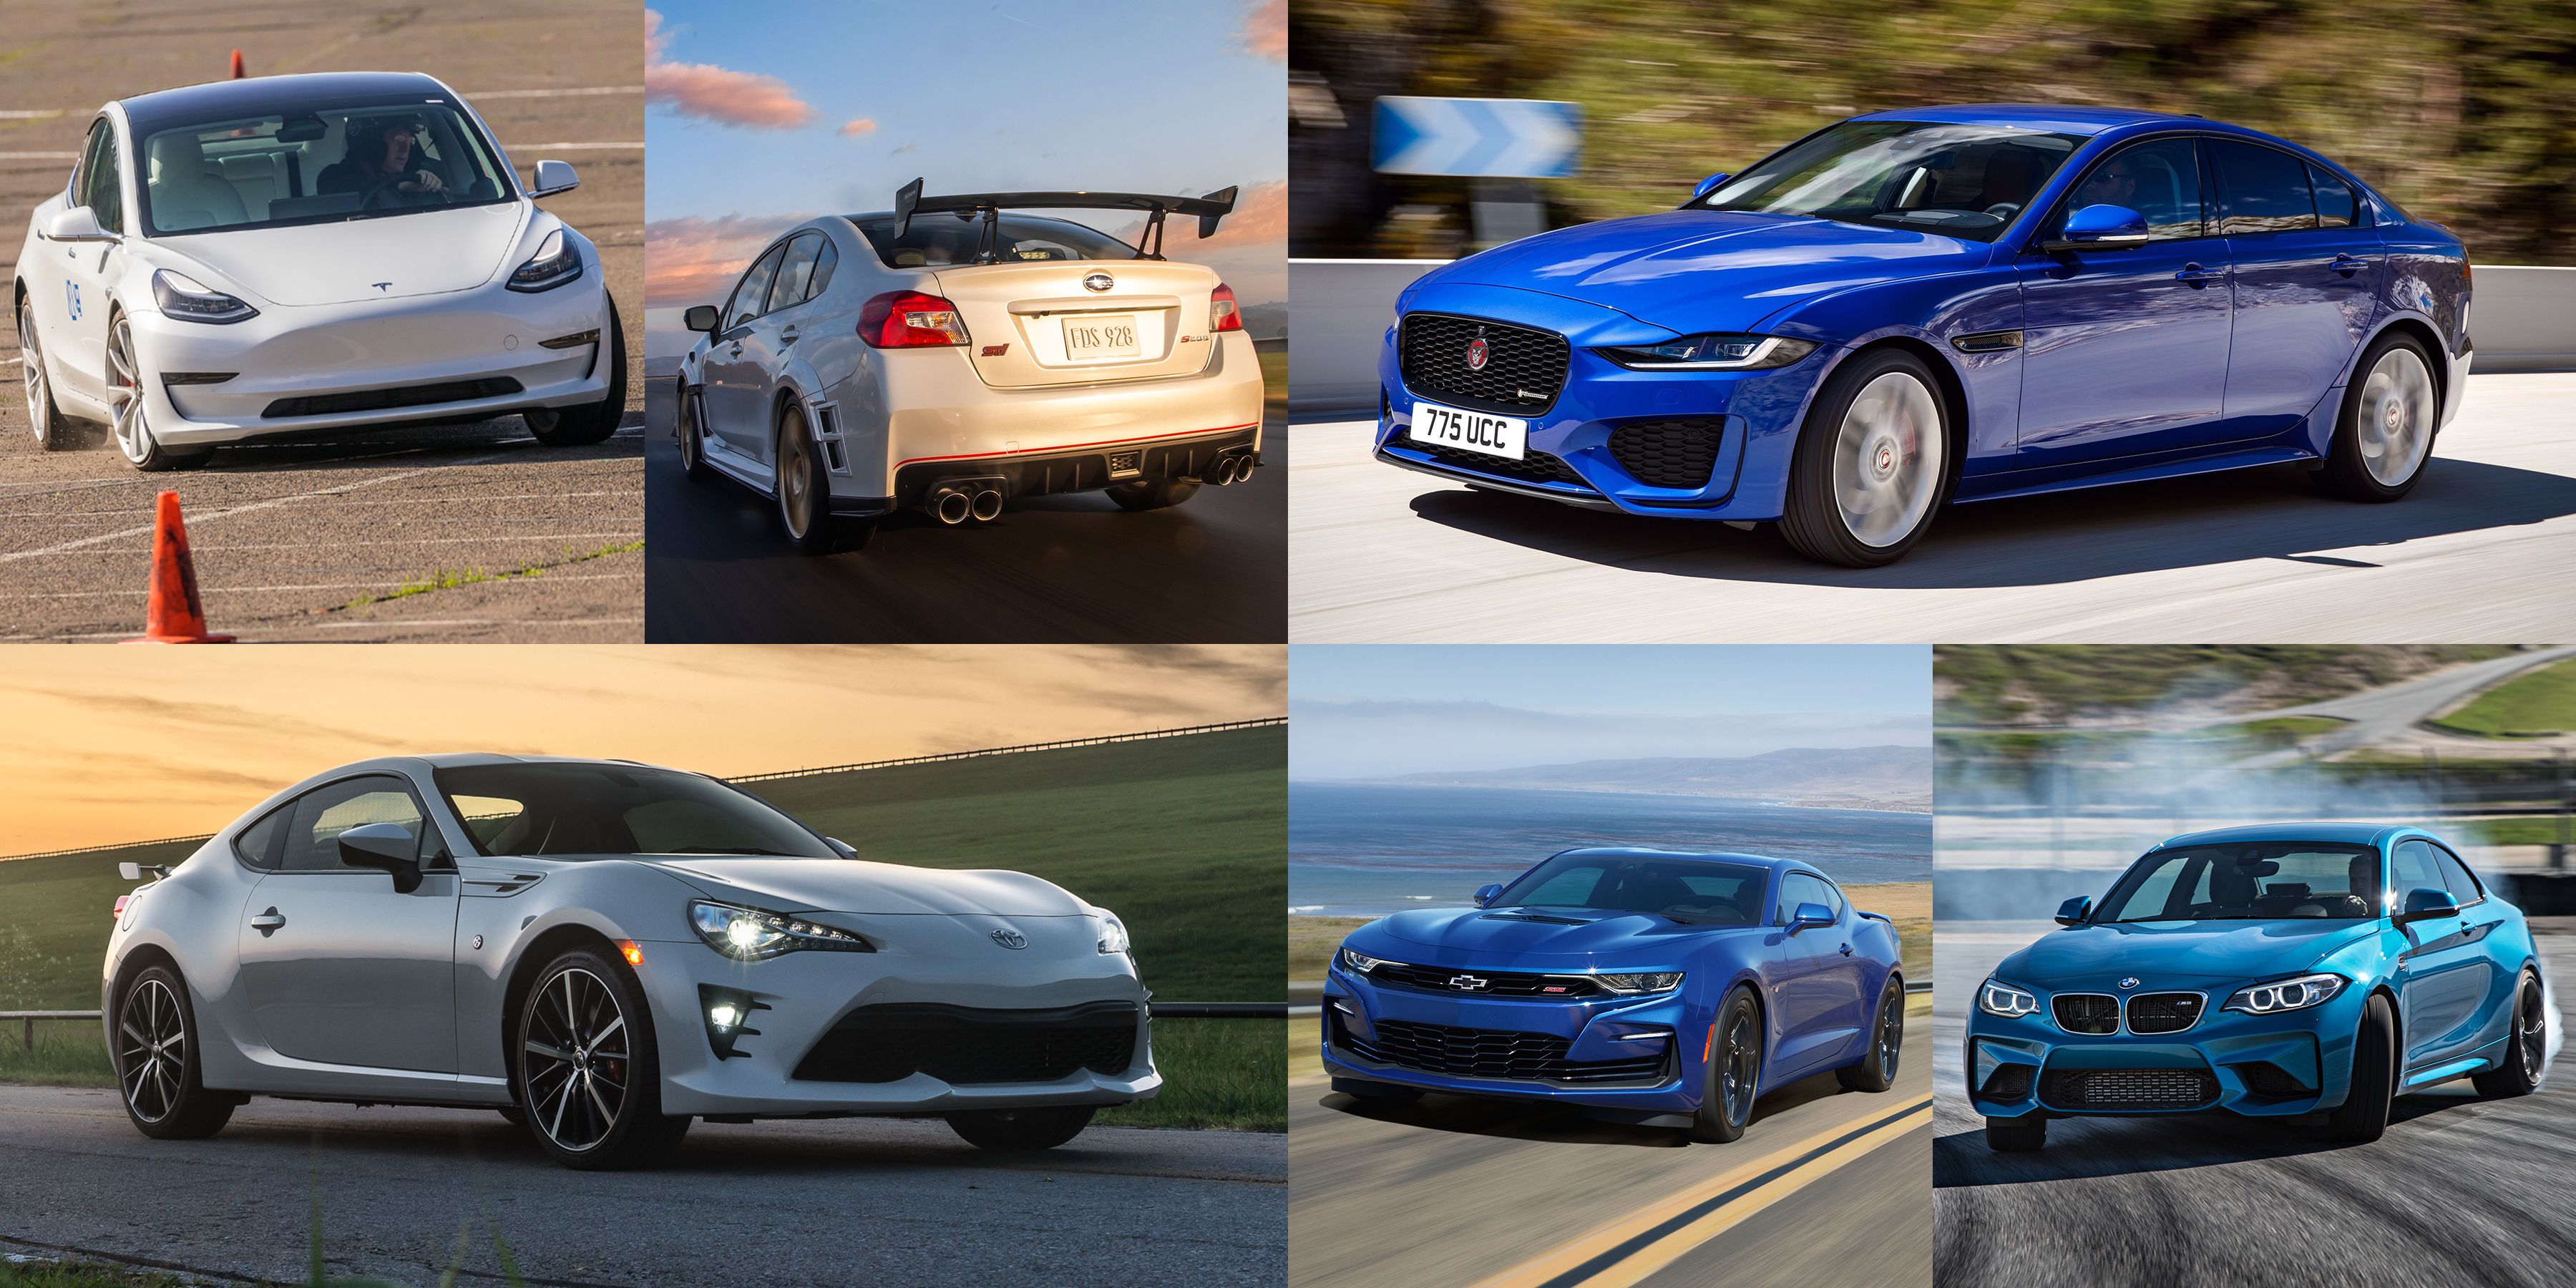 The Sports (and Sporty) Cars You Can Buy for $50,000